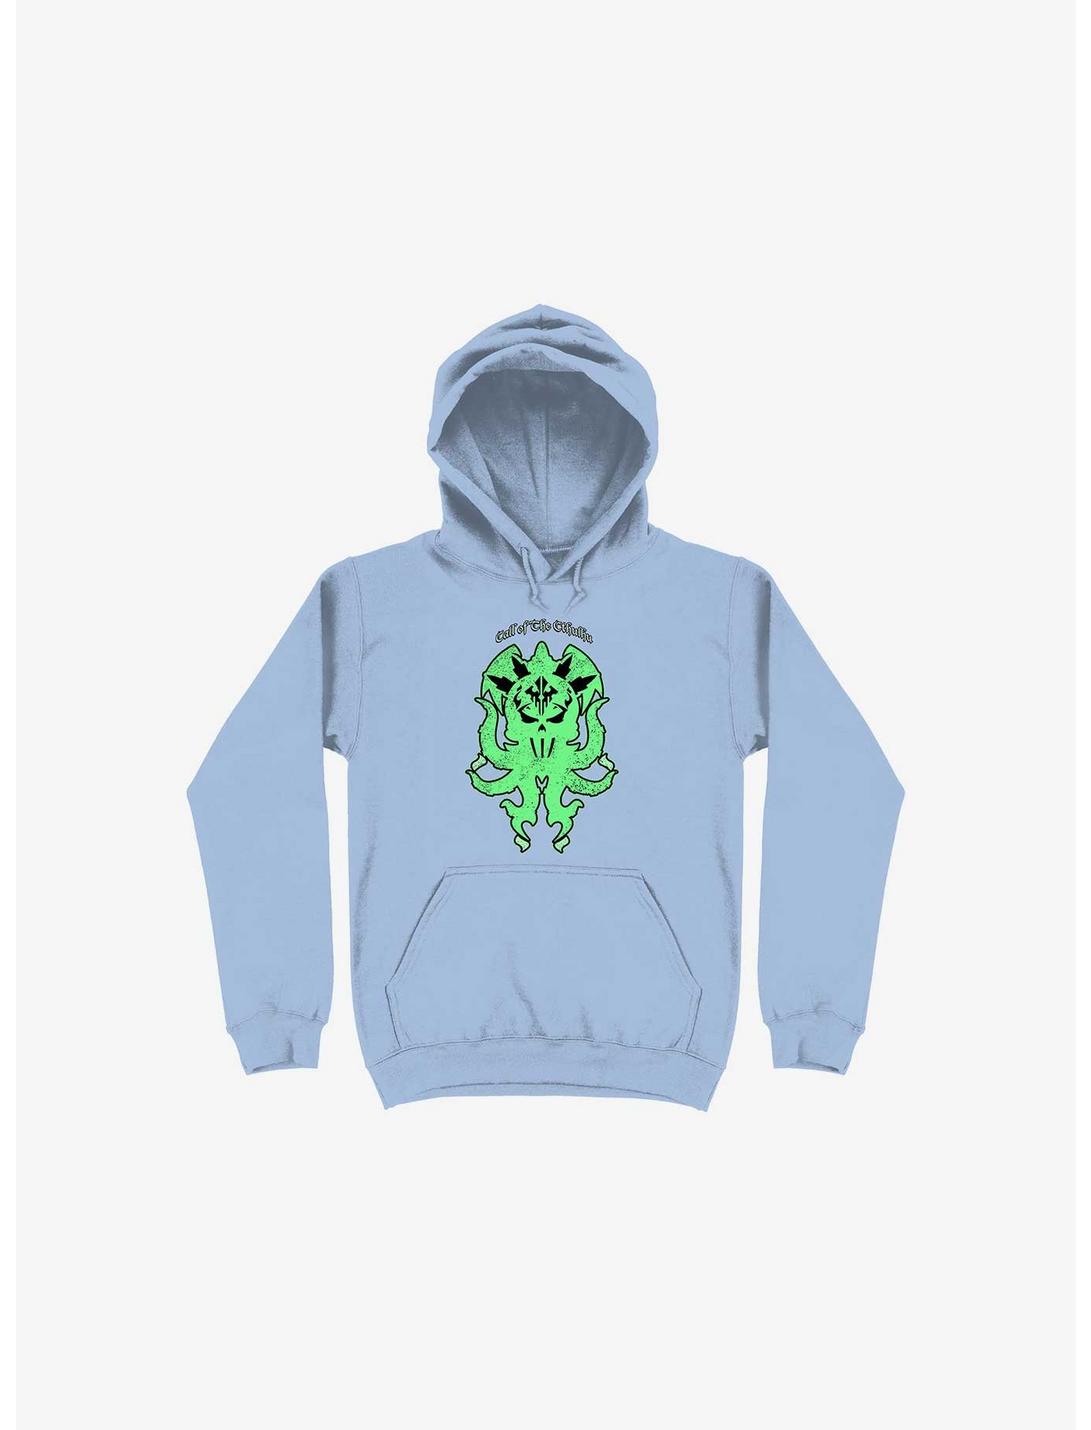 Call Of The Cthulhu Hoodie, LIGHT BLUE, hi-res